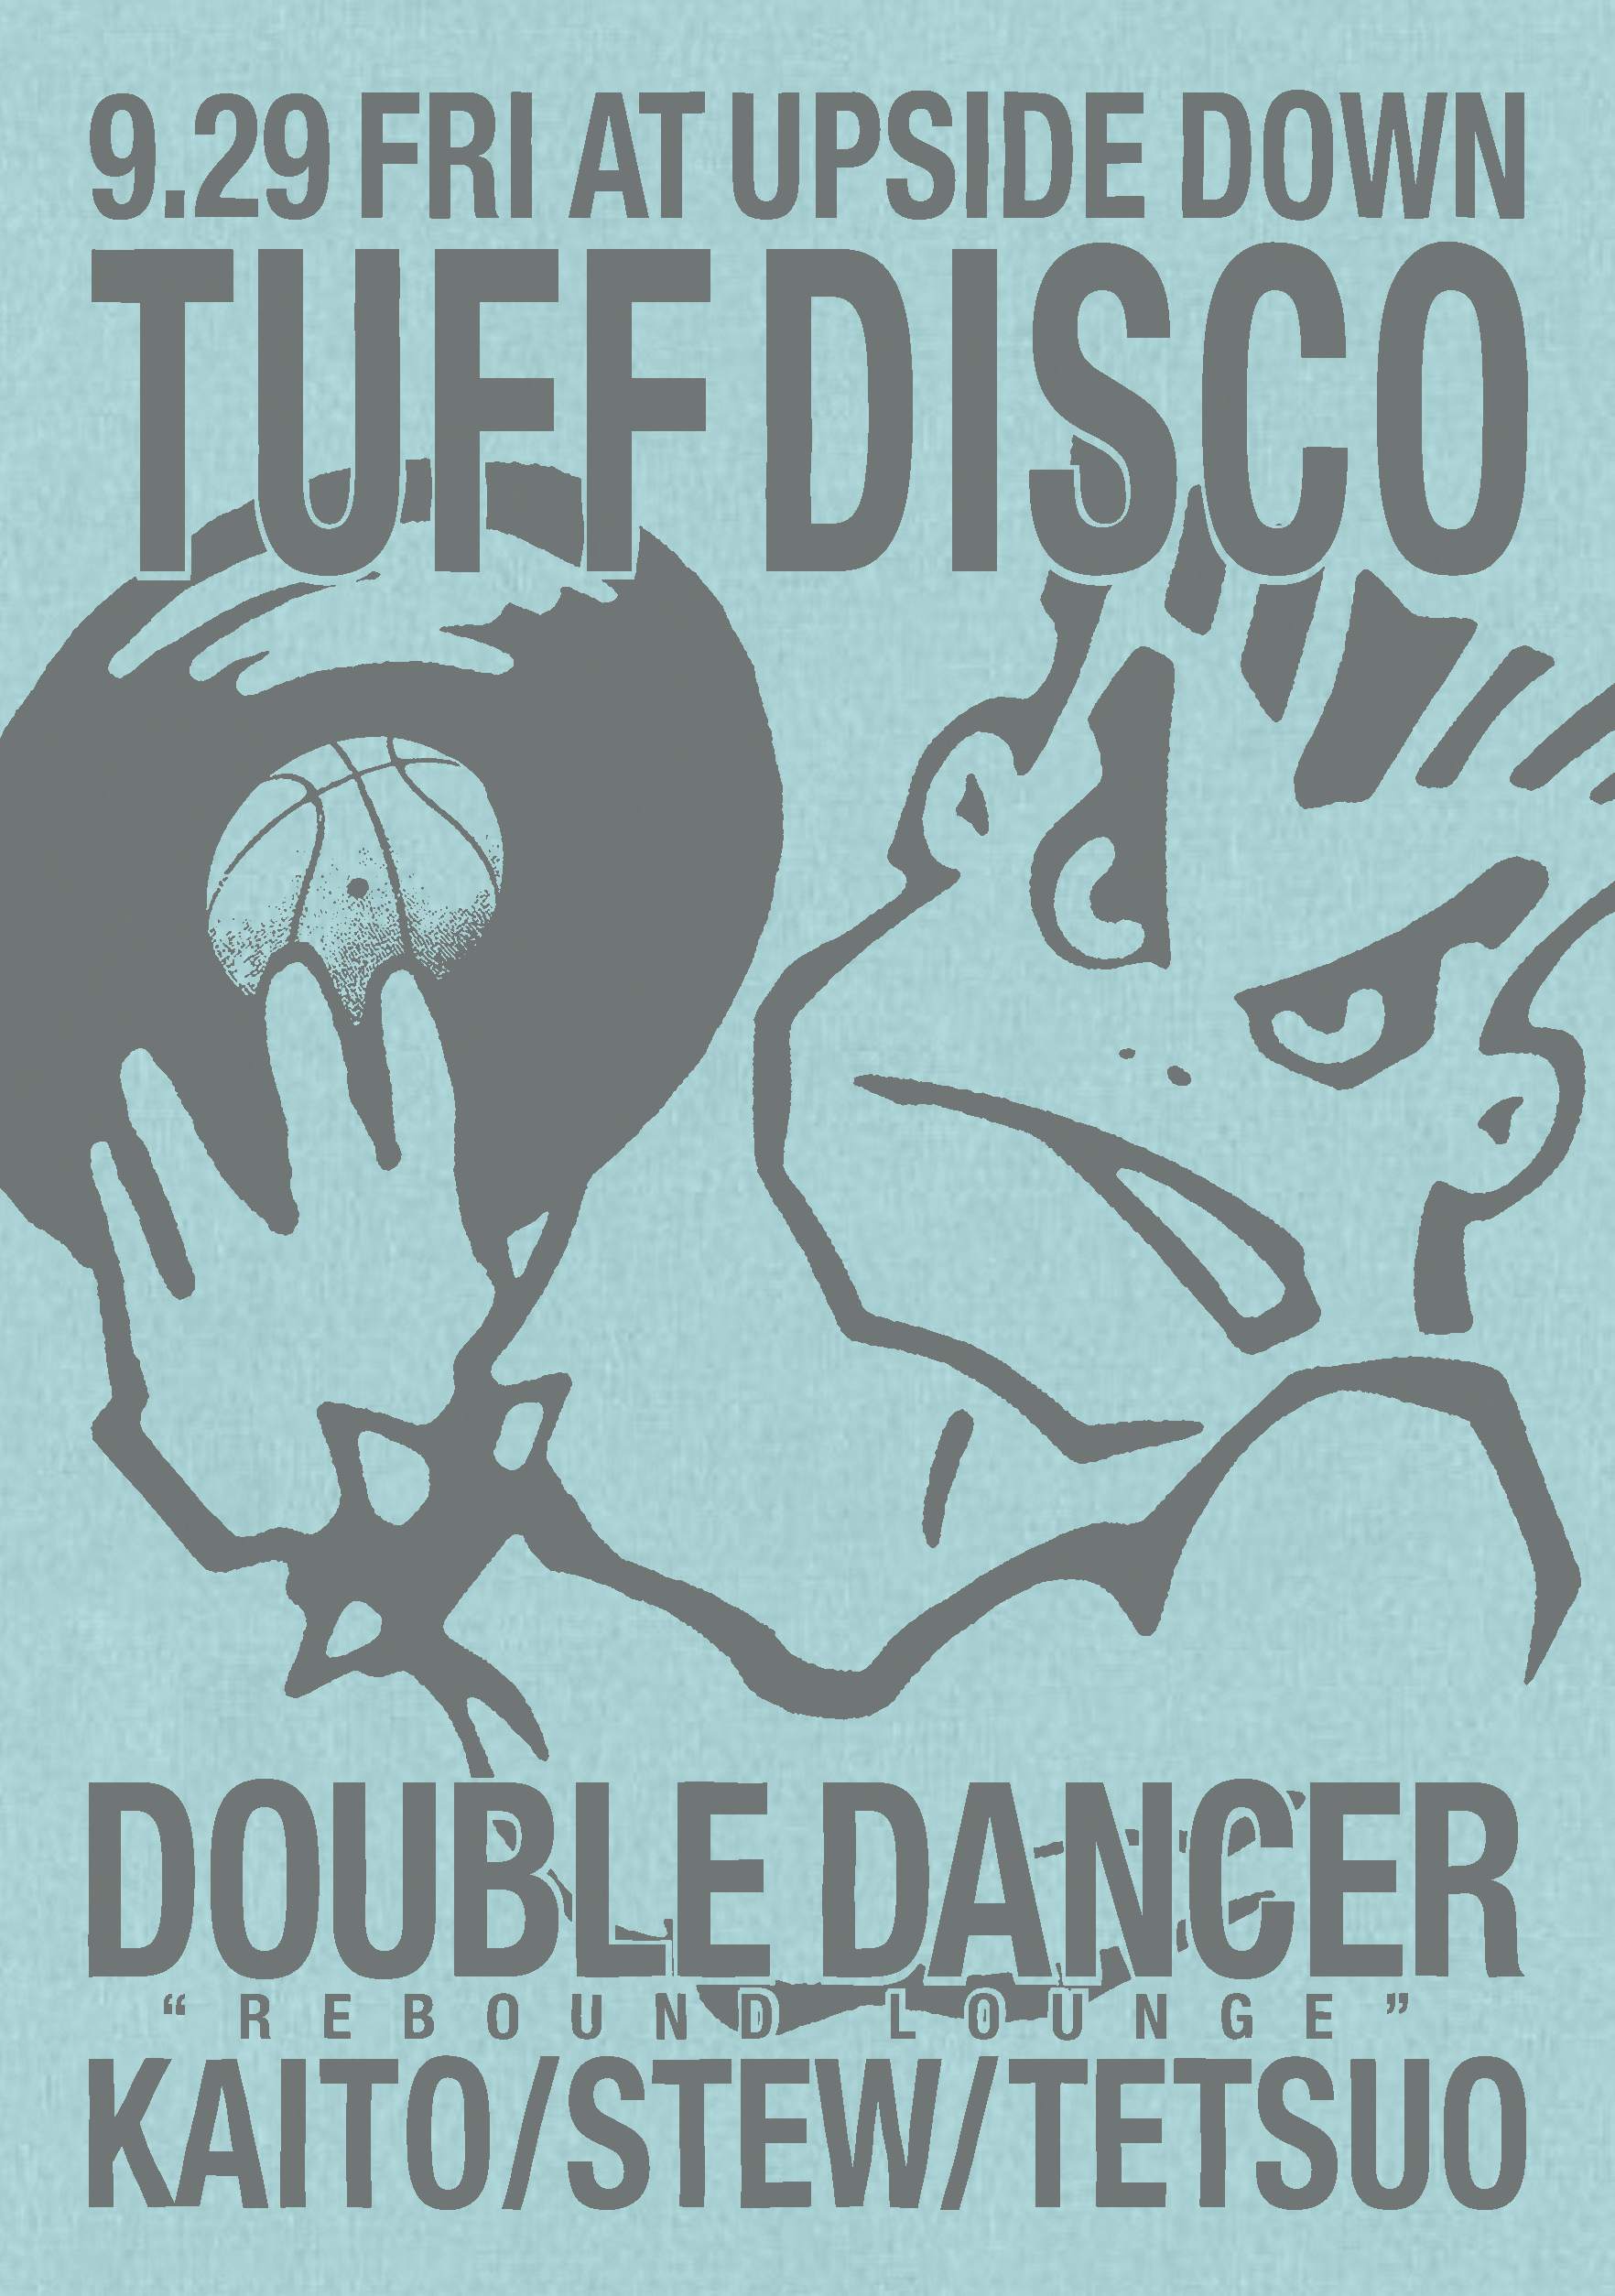 Tuff Disco with Double Dancer - フライヤー表